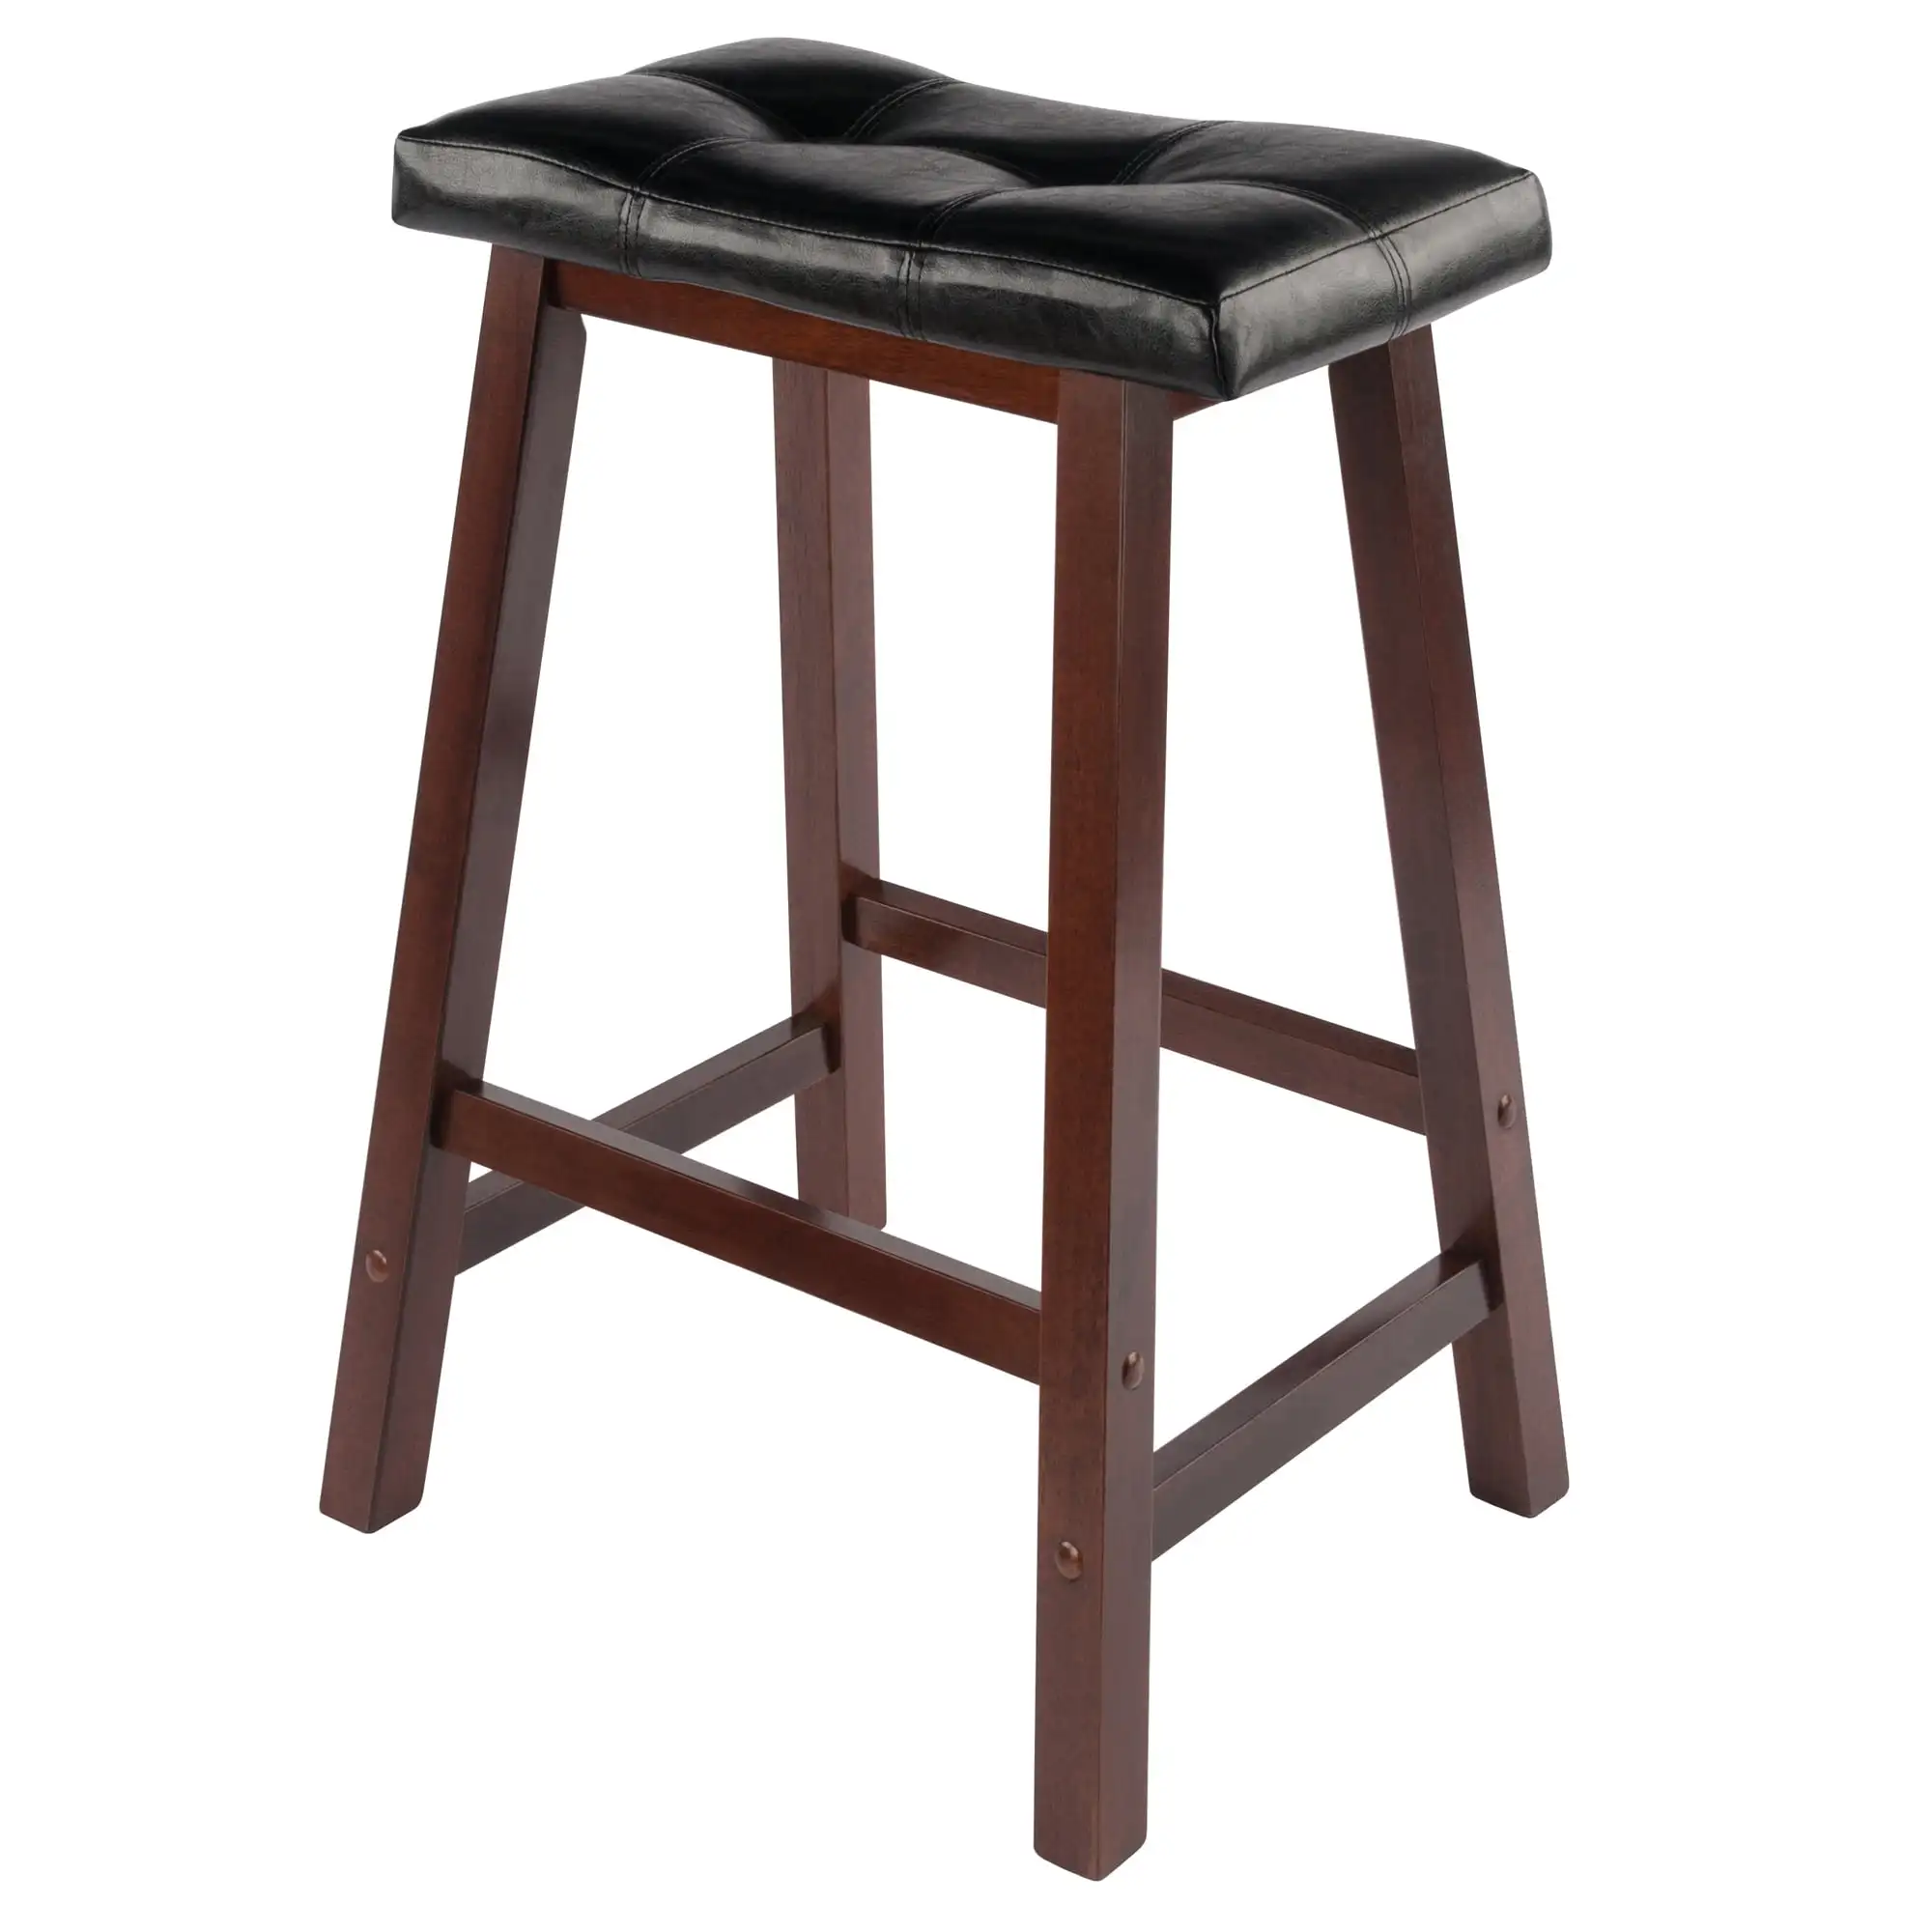 

29 in. Cushion Saddle Seat Bar Stool with Black Faux Leather Barstool Bar Chair Counter Height Bar Stools